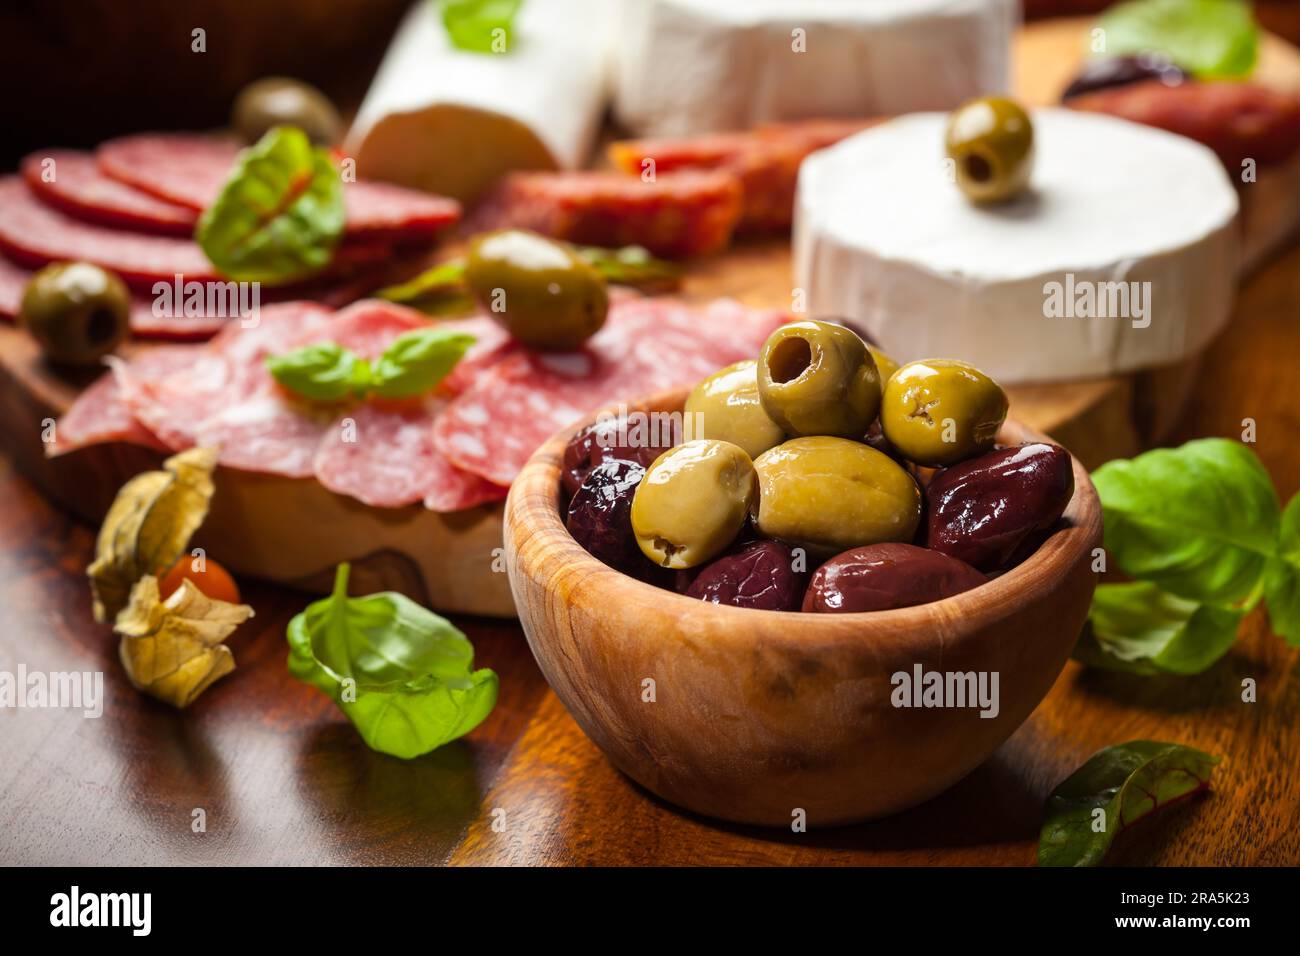 Fresh olives and antipasto catering platter Stock Photo